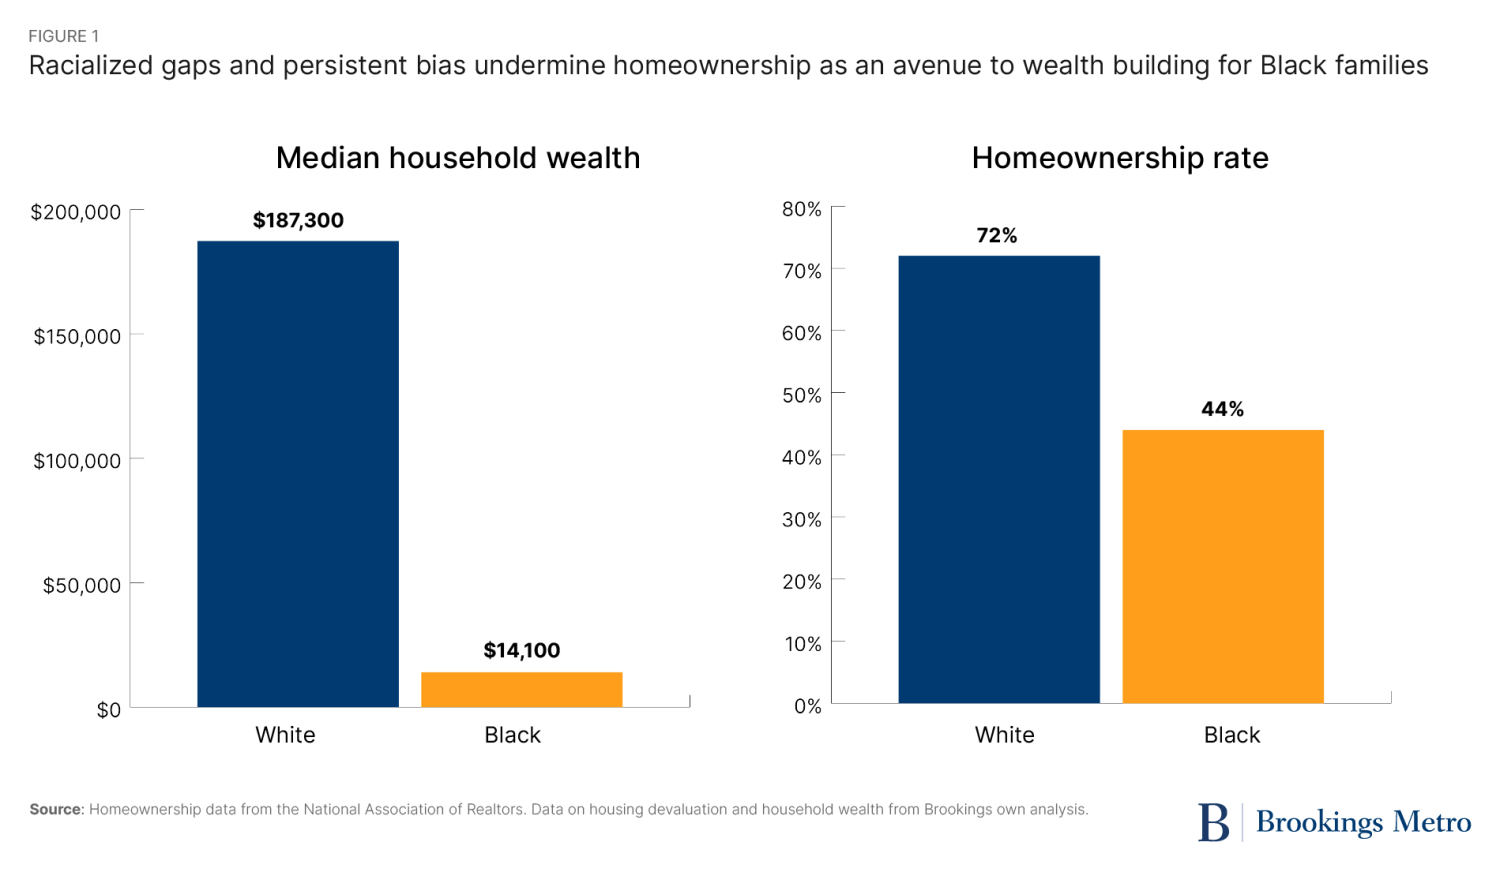 Figure 1: Racialized gaps and persistent bias undermine homeownership as an avenue to wealth building for Black families